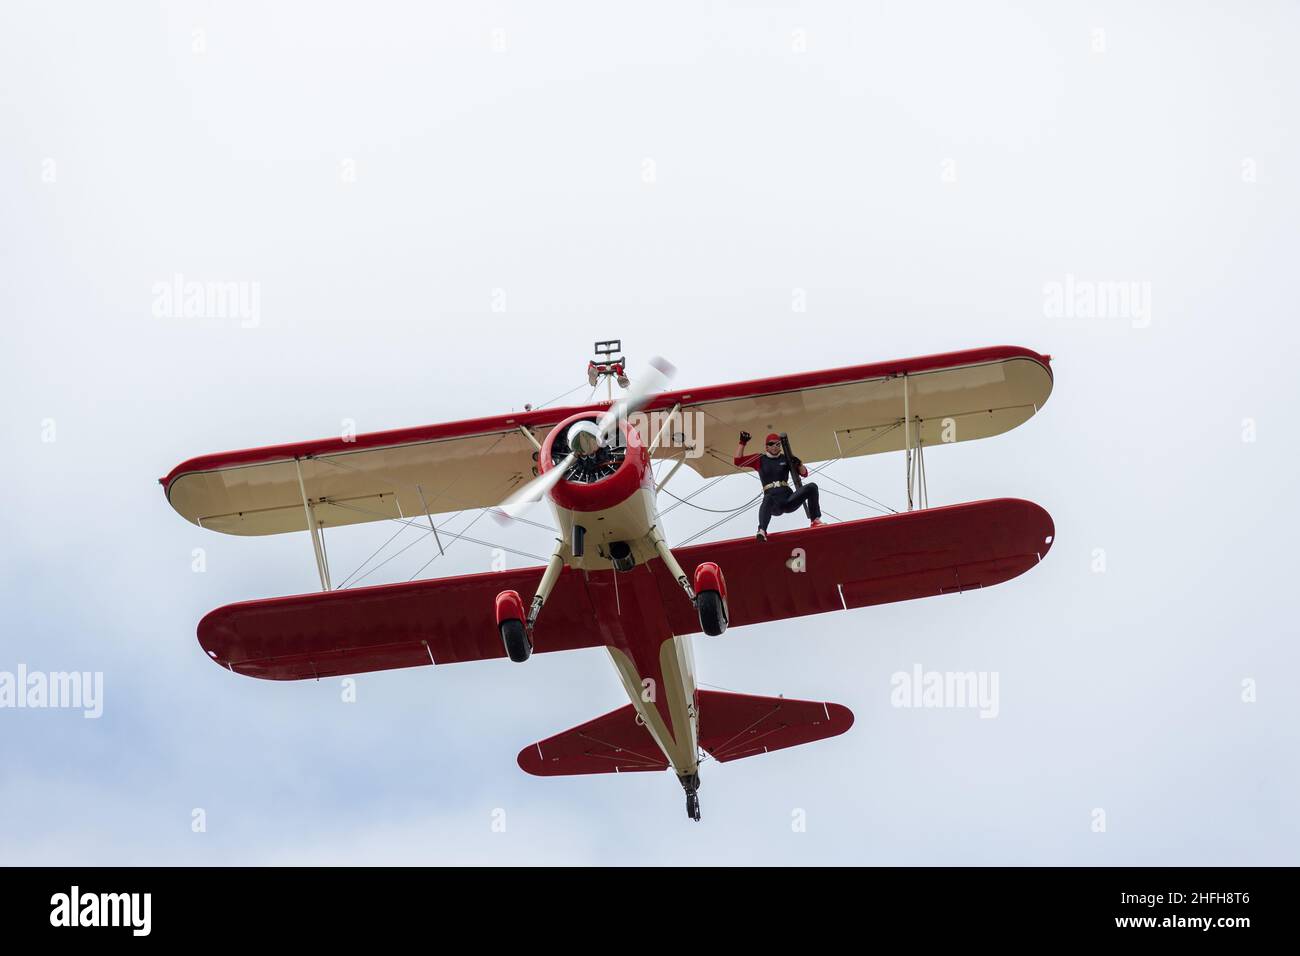 Aerobatics combined with a wingwalk on a biplane Stock Photo